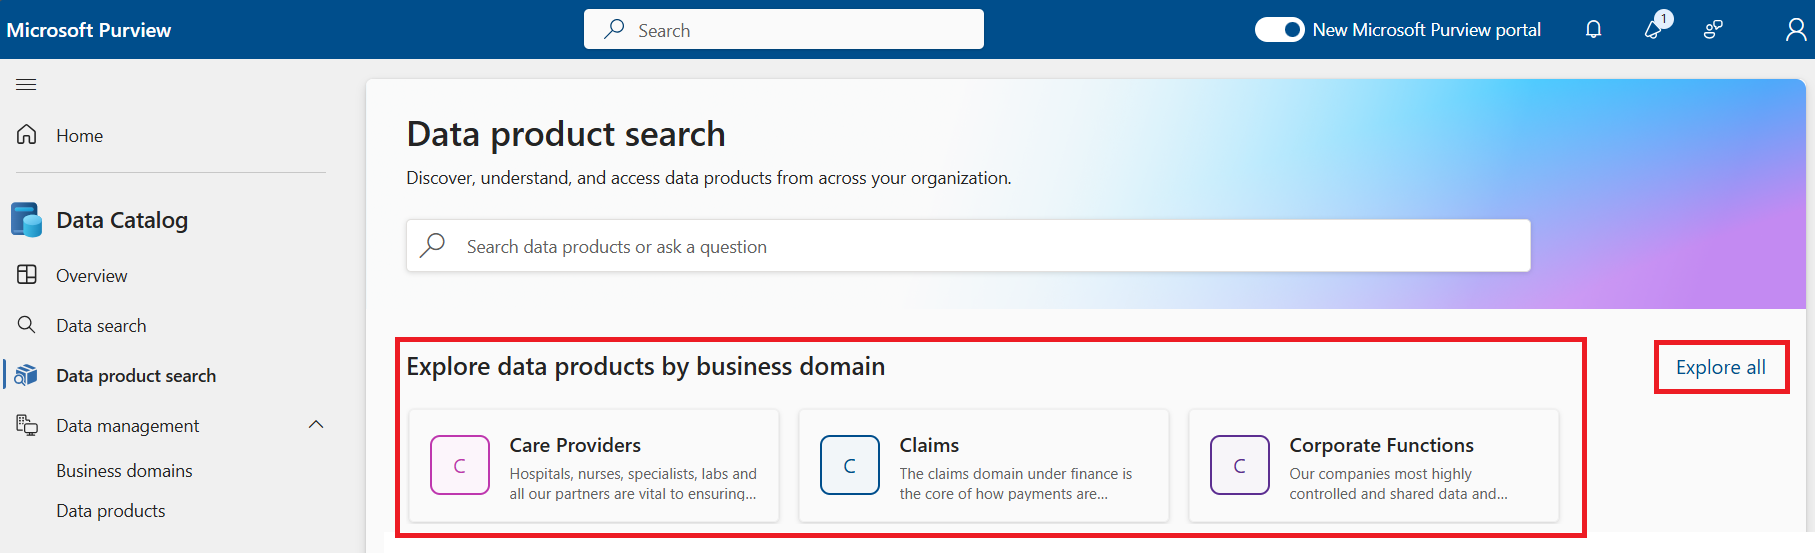 Screenshot of the data product search page, with Explore all and the business domains highlighted.